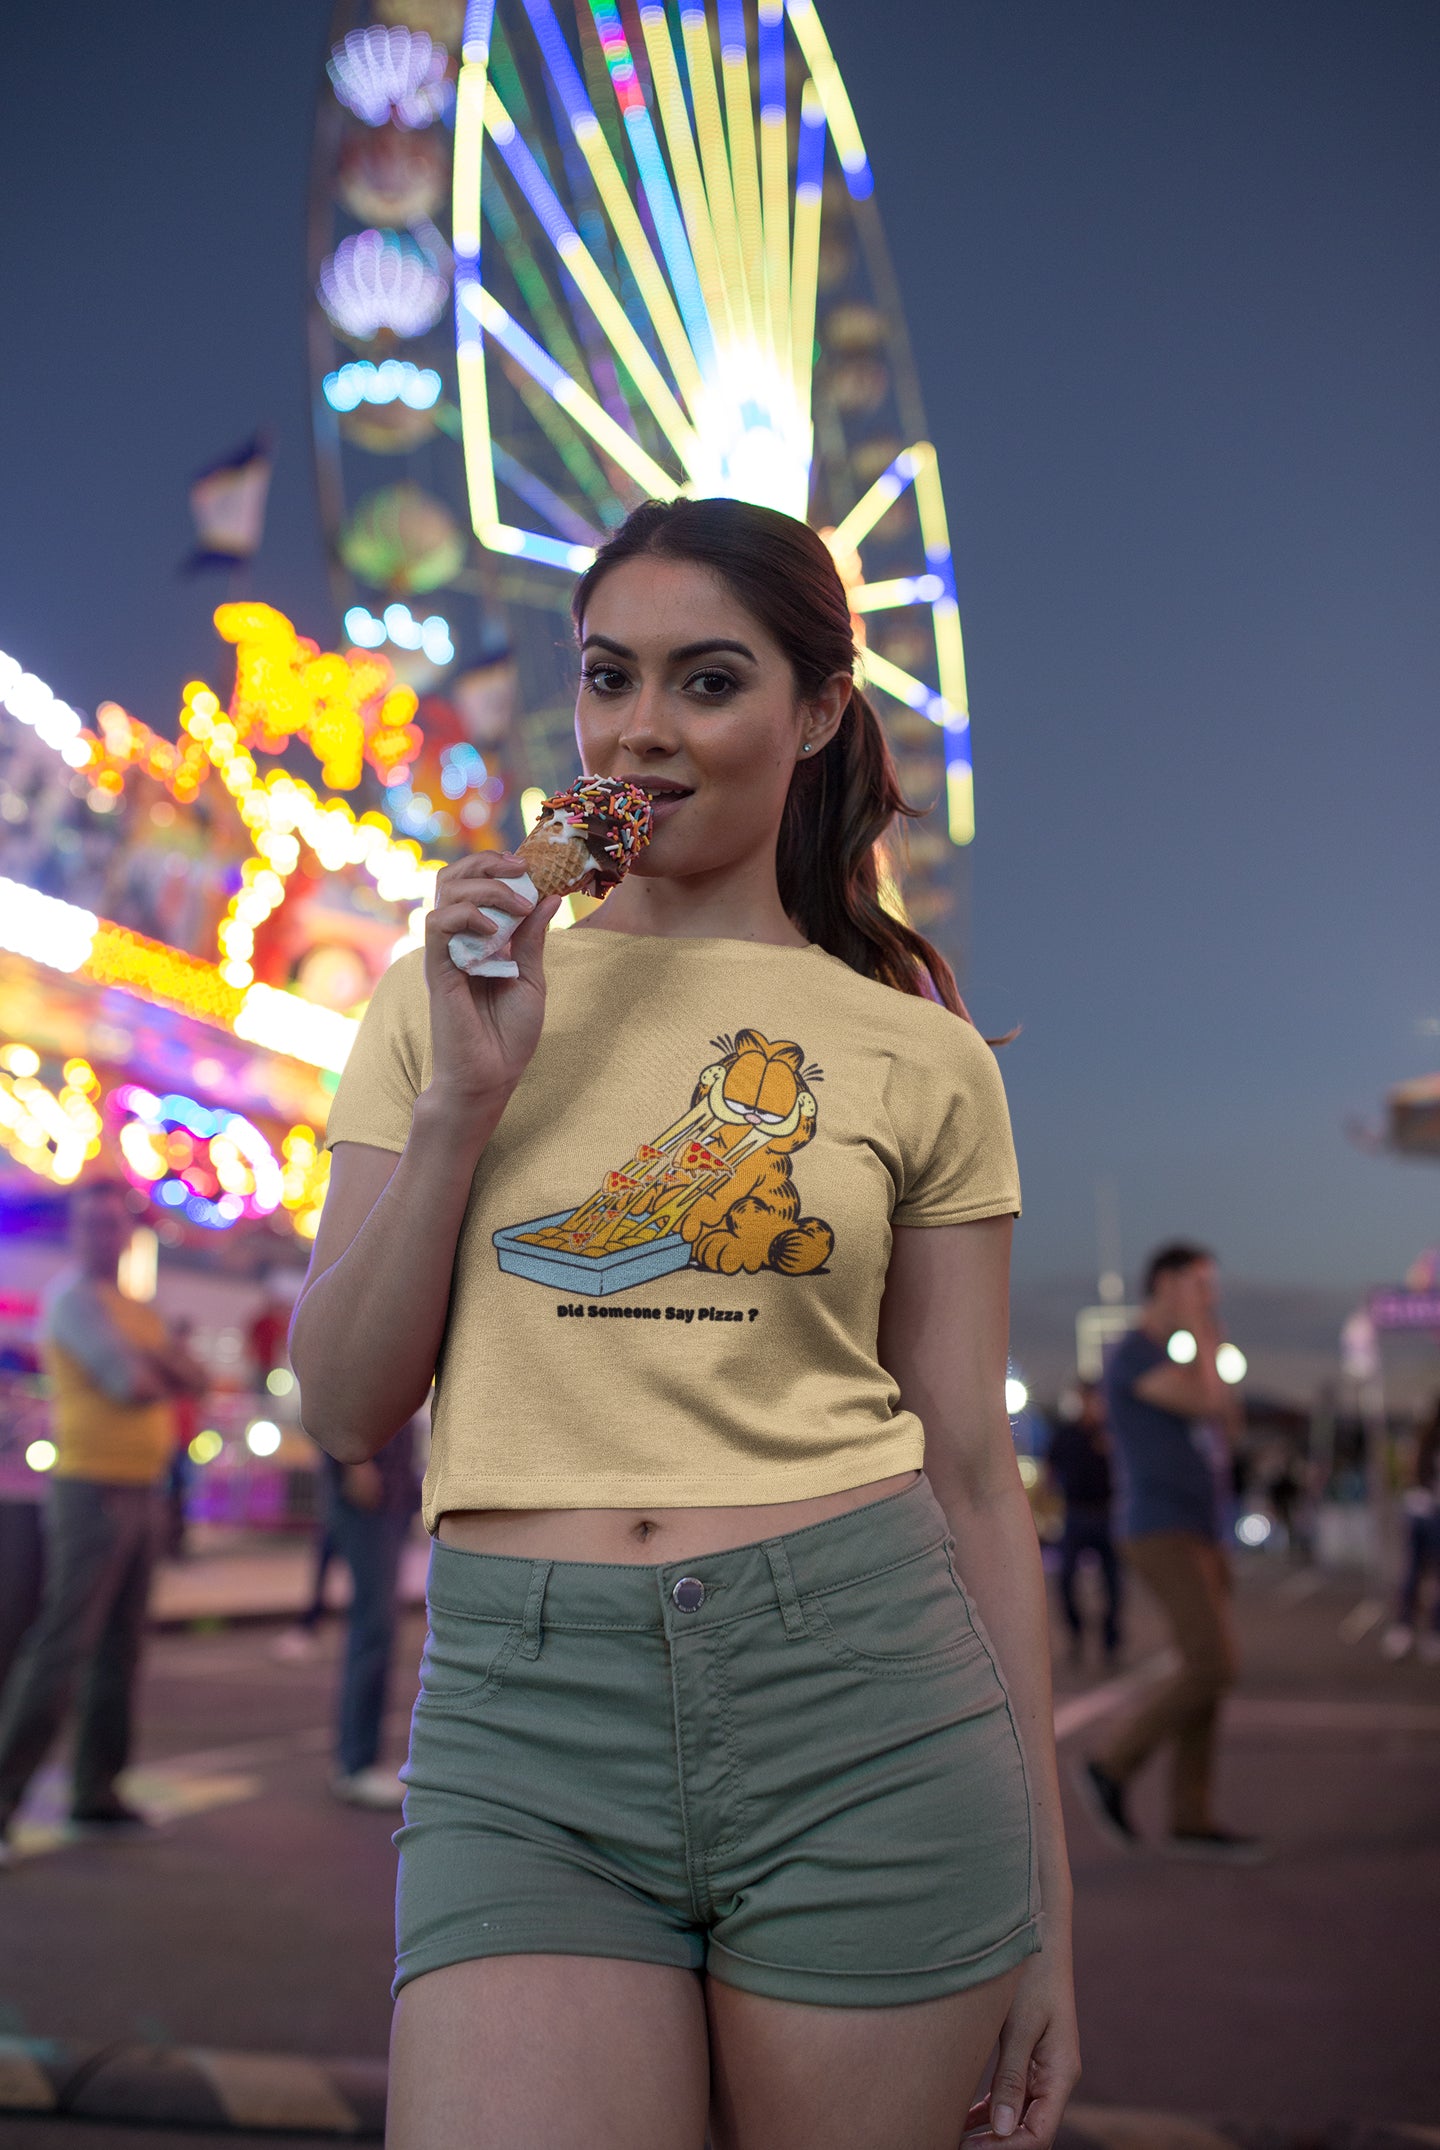 Garfield Did Someone Say Pizza Crop Top For Ladies